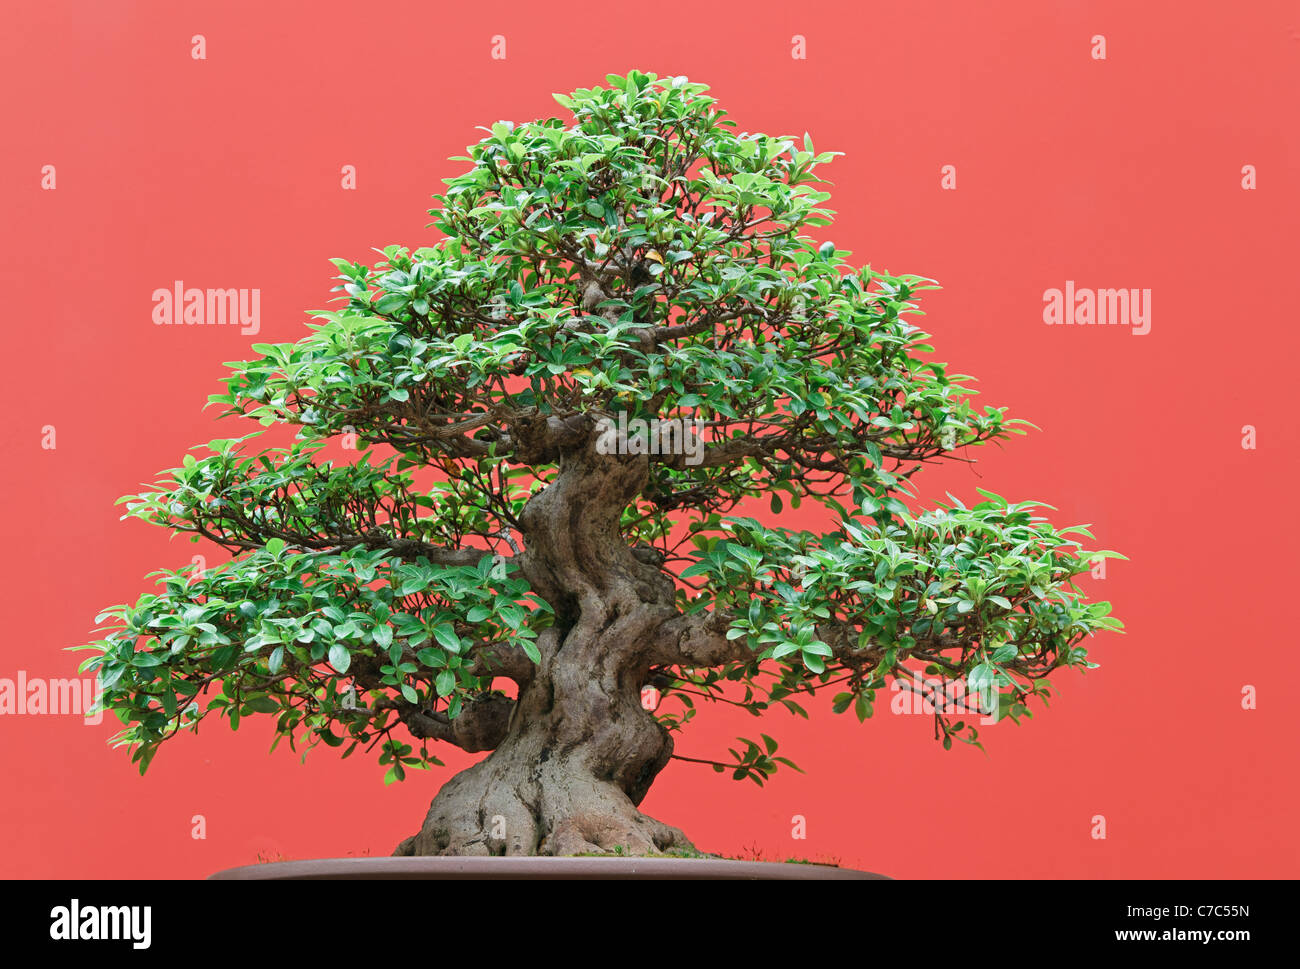 beautiful Ficus tree bonsai over red background Stock Photo